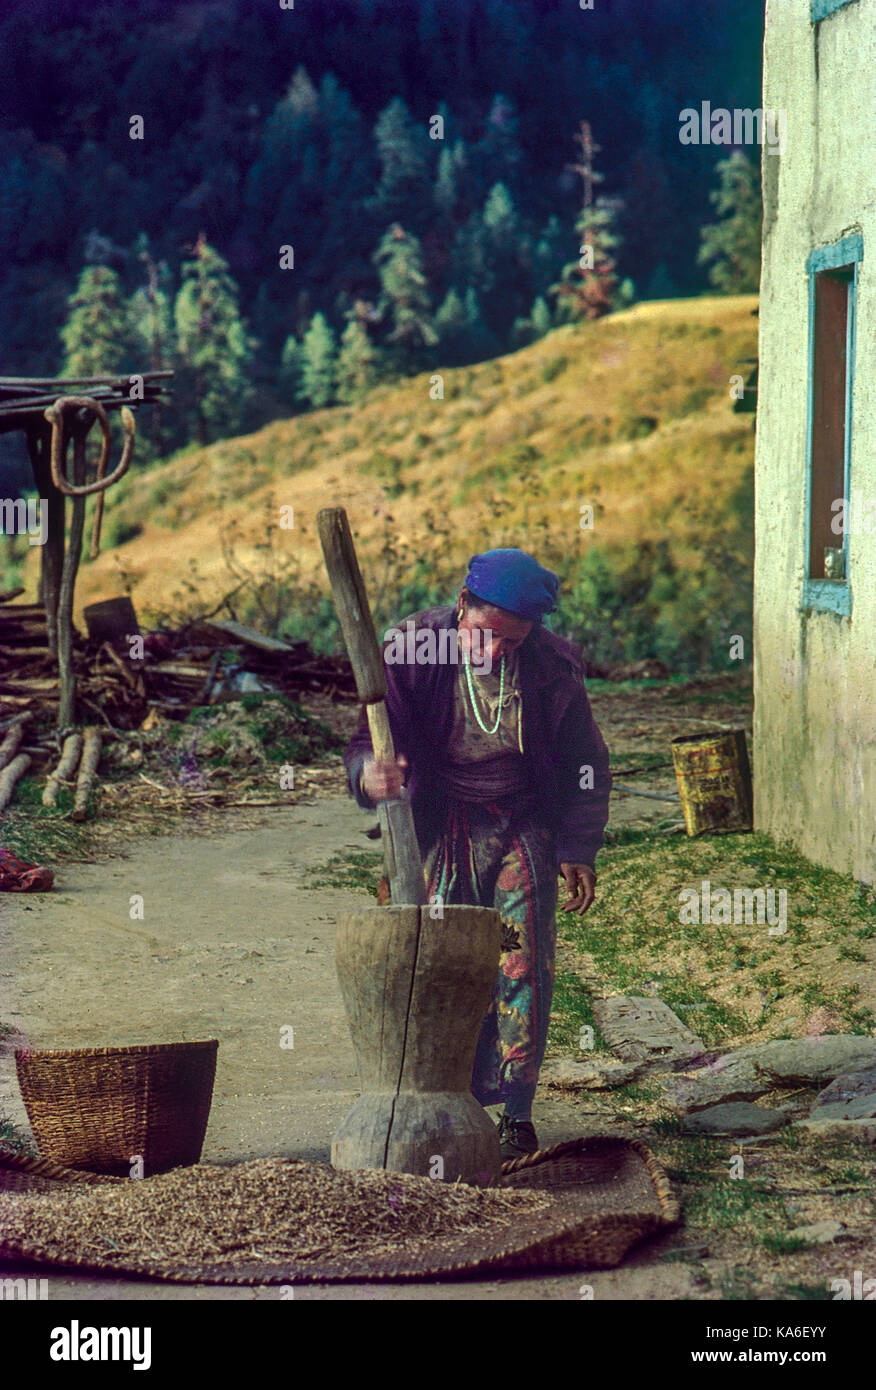 woman pounding rice in wooden mortar, nepal, Asia - stp 258987 Stock Photo